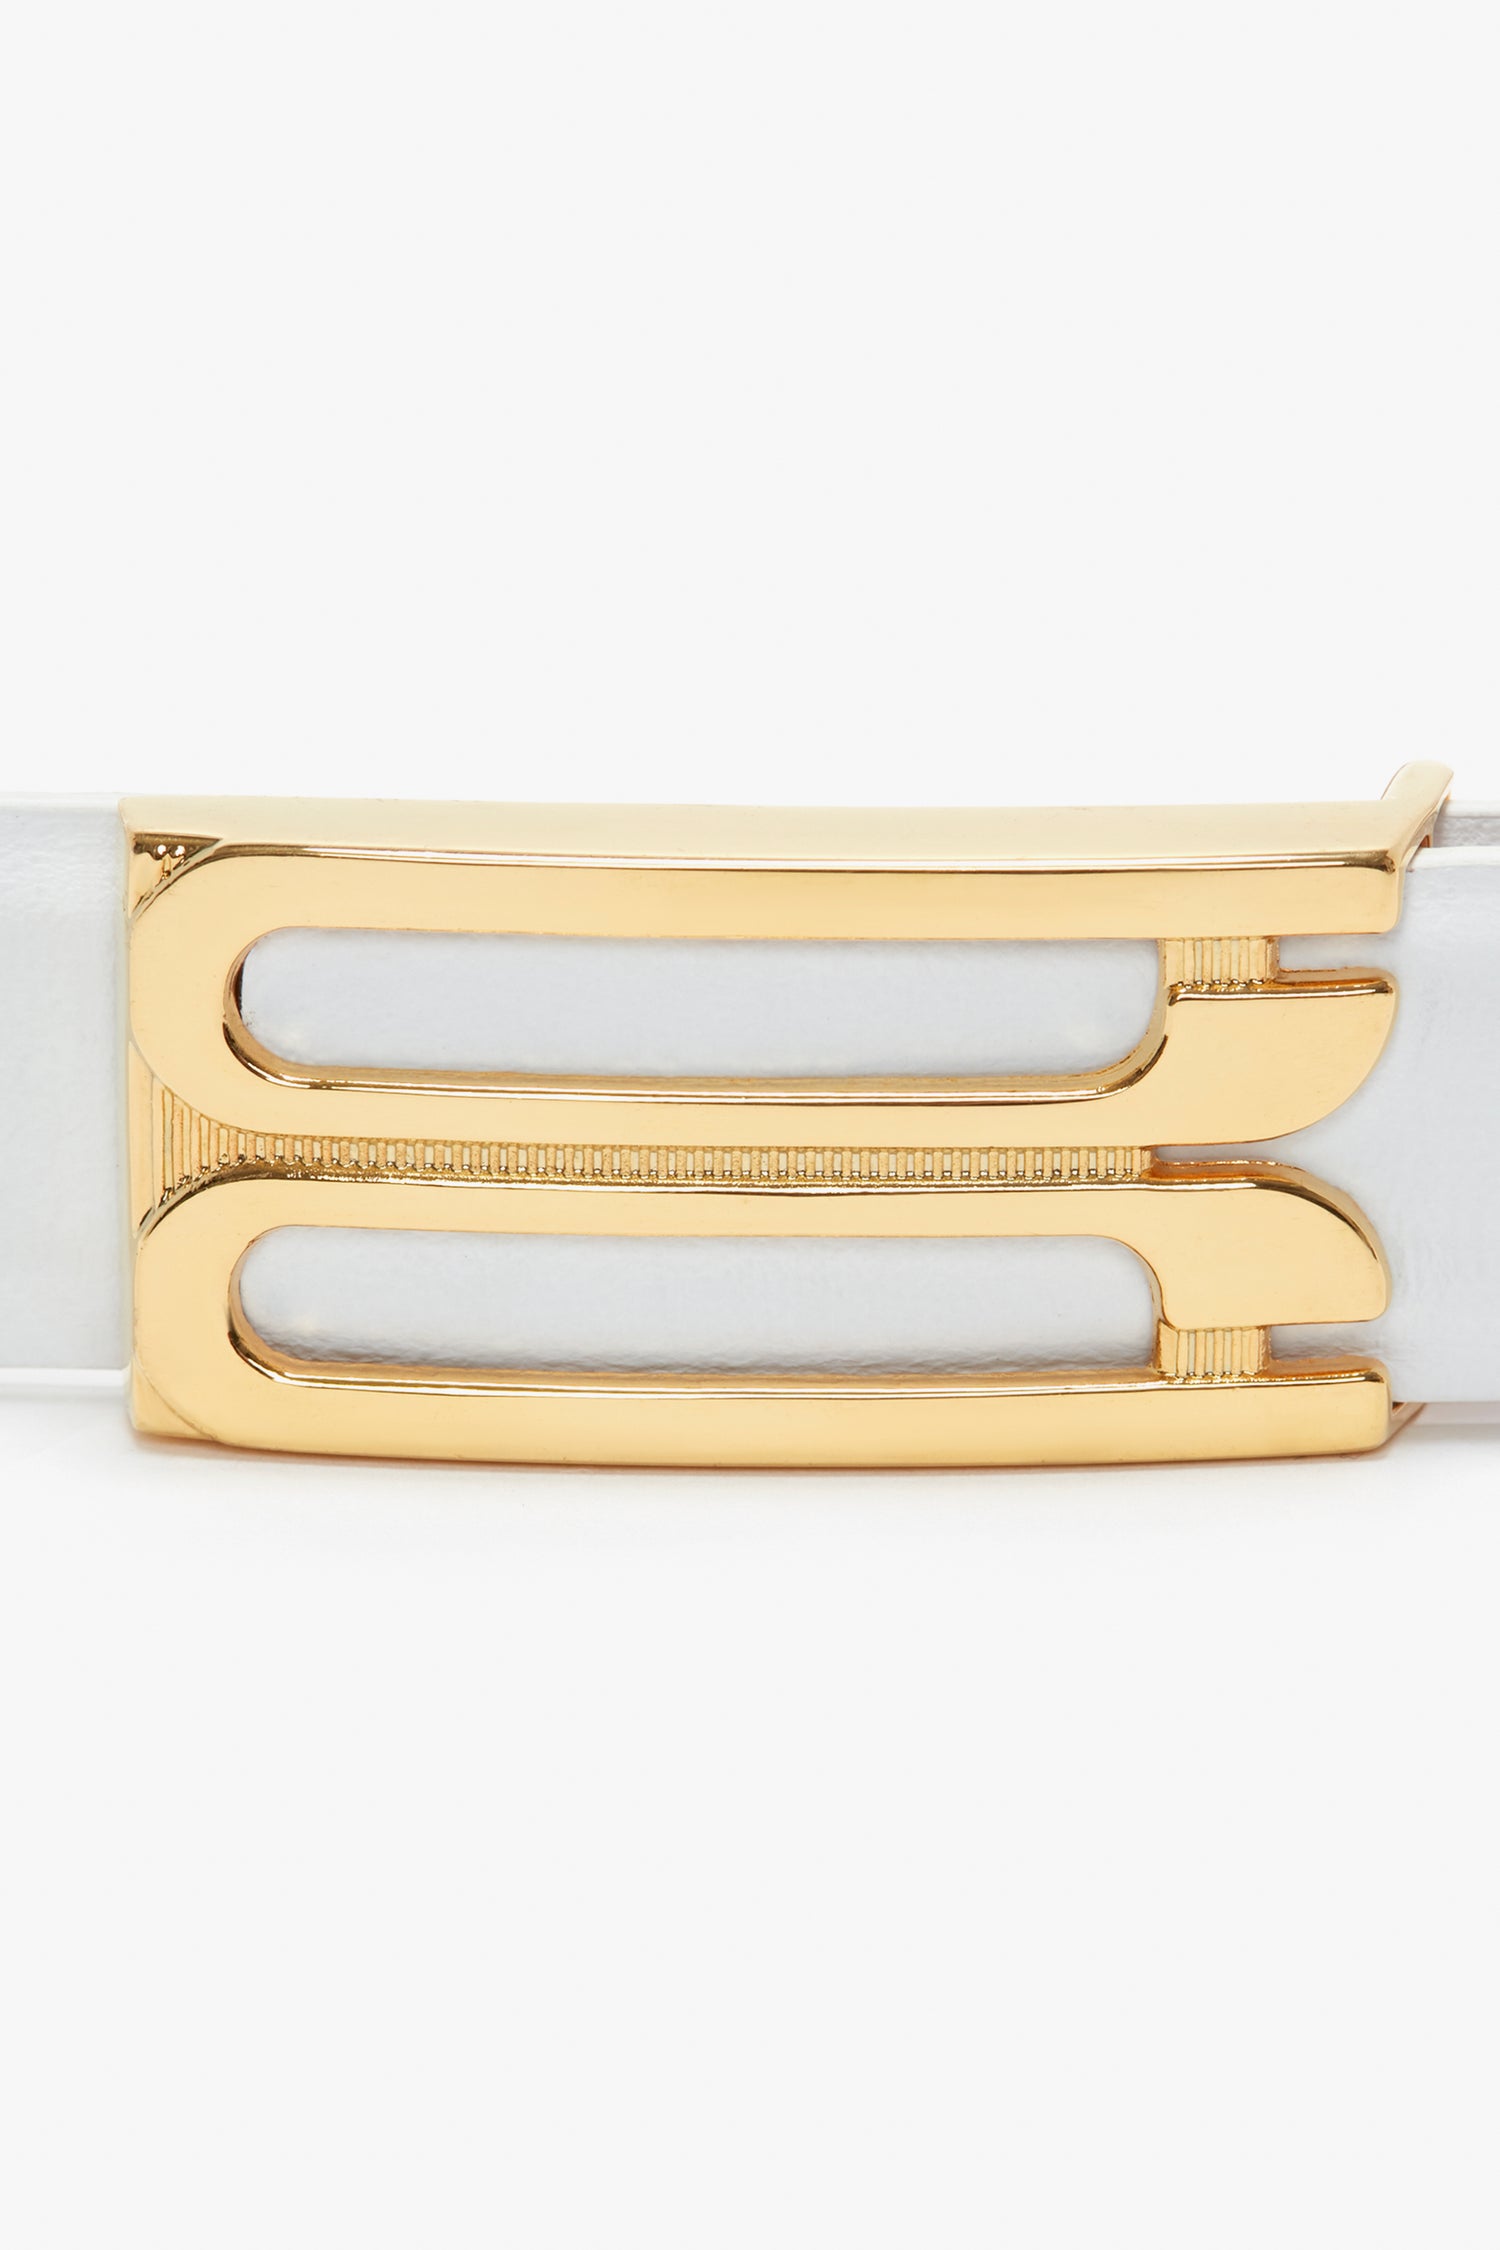 Gold buckle close-up on a Victoria Beckham Exclusive Frame Belt in White Leather, showing a sleek design with two elongated slots.